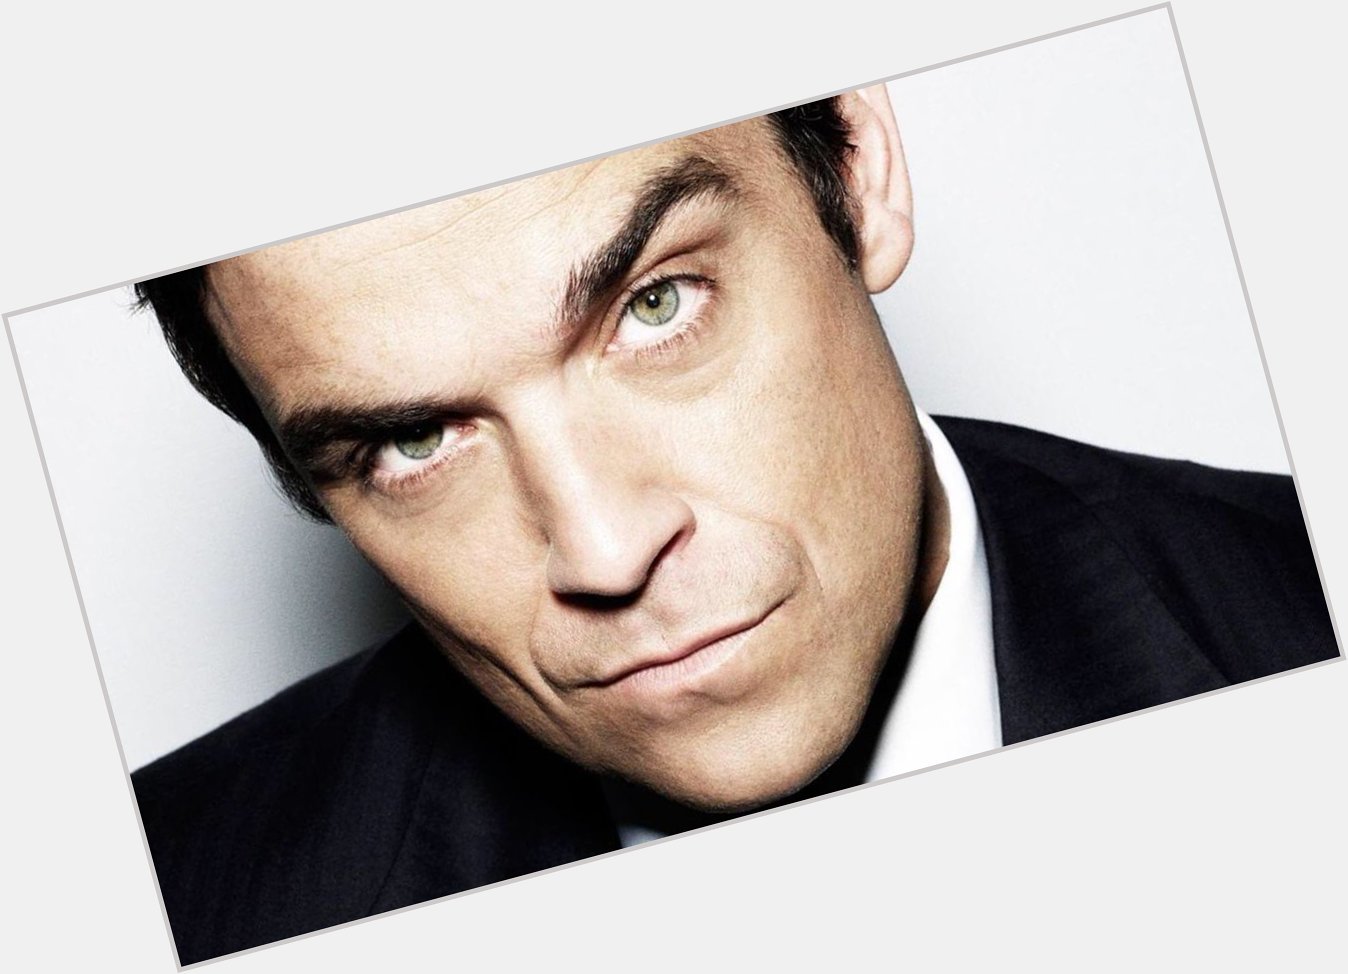 Happy 45th birthday to Robbie Williams! His 1997 UK No.1 album \Life Thru A Lens \ spent 123 weeks on the UK chart! 